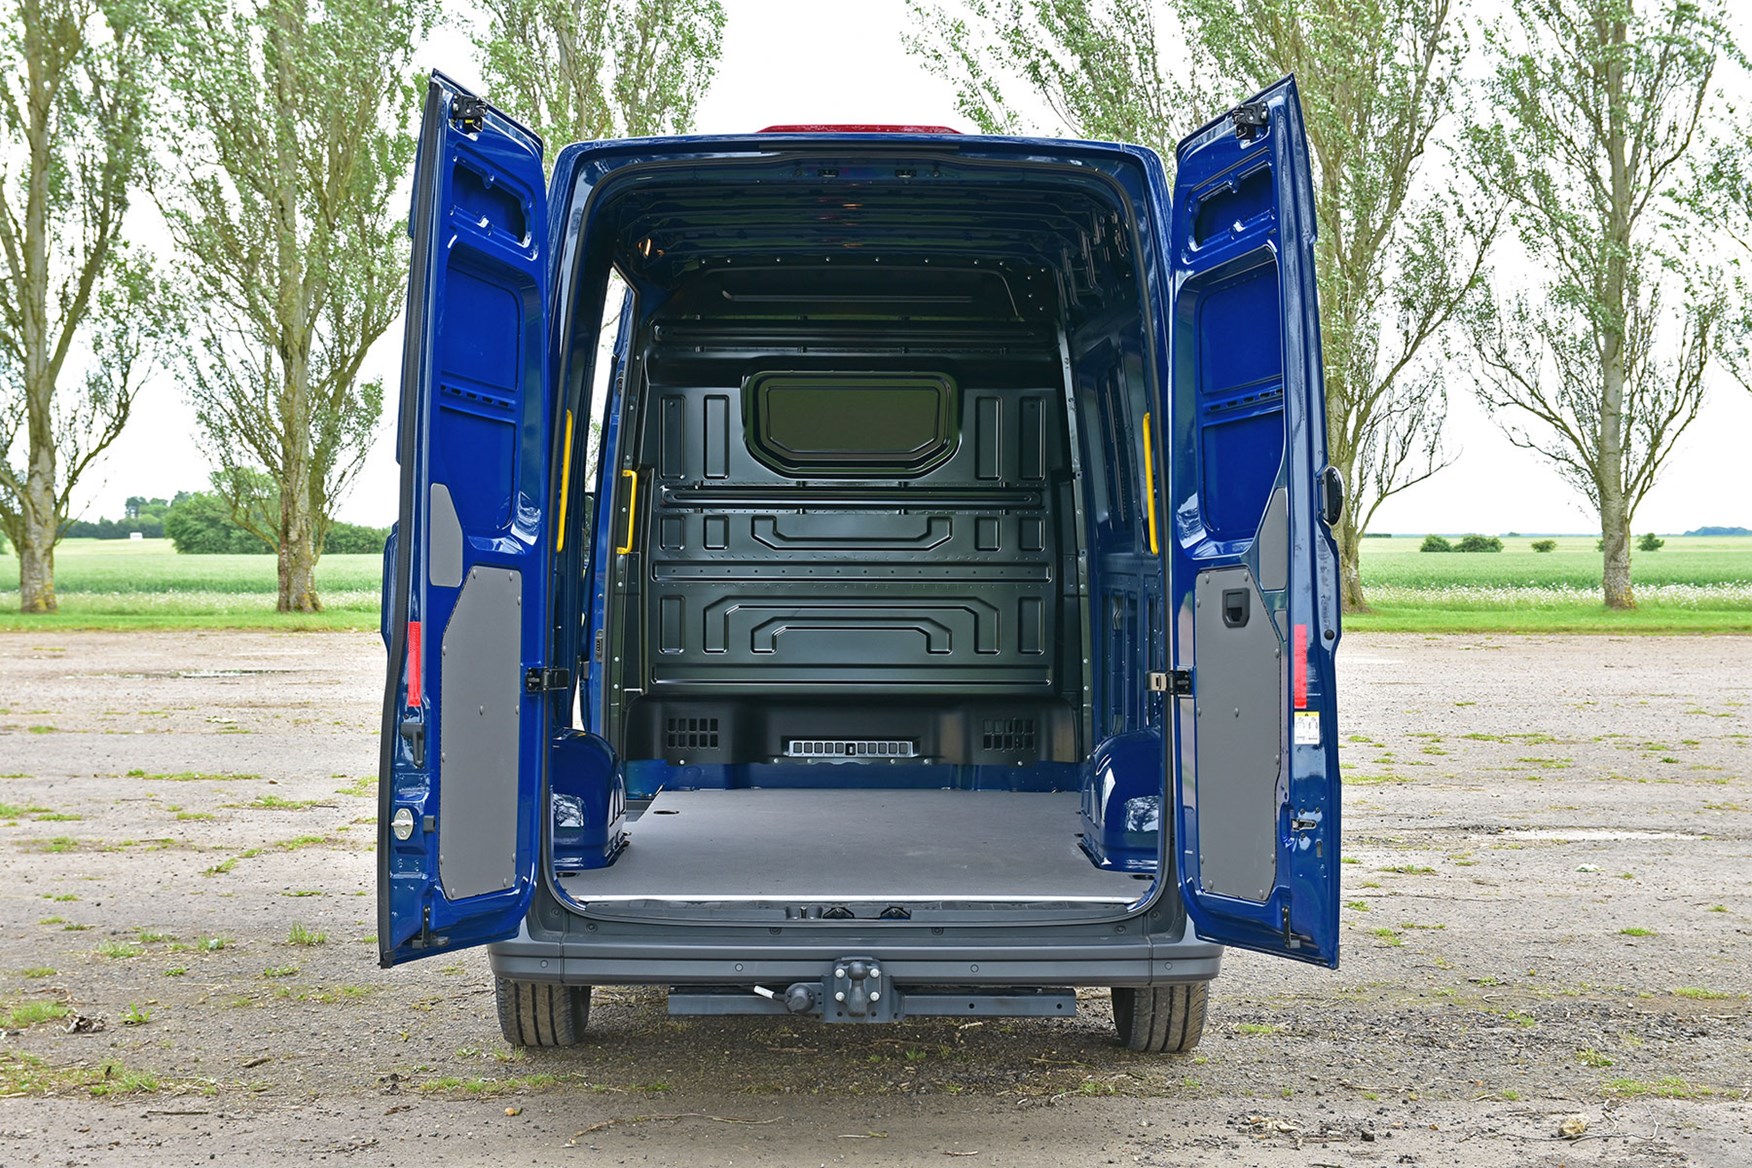 VW Crafter FWD review - load area